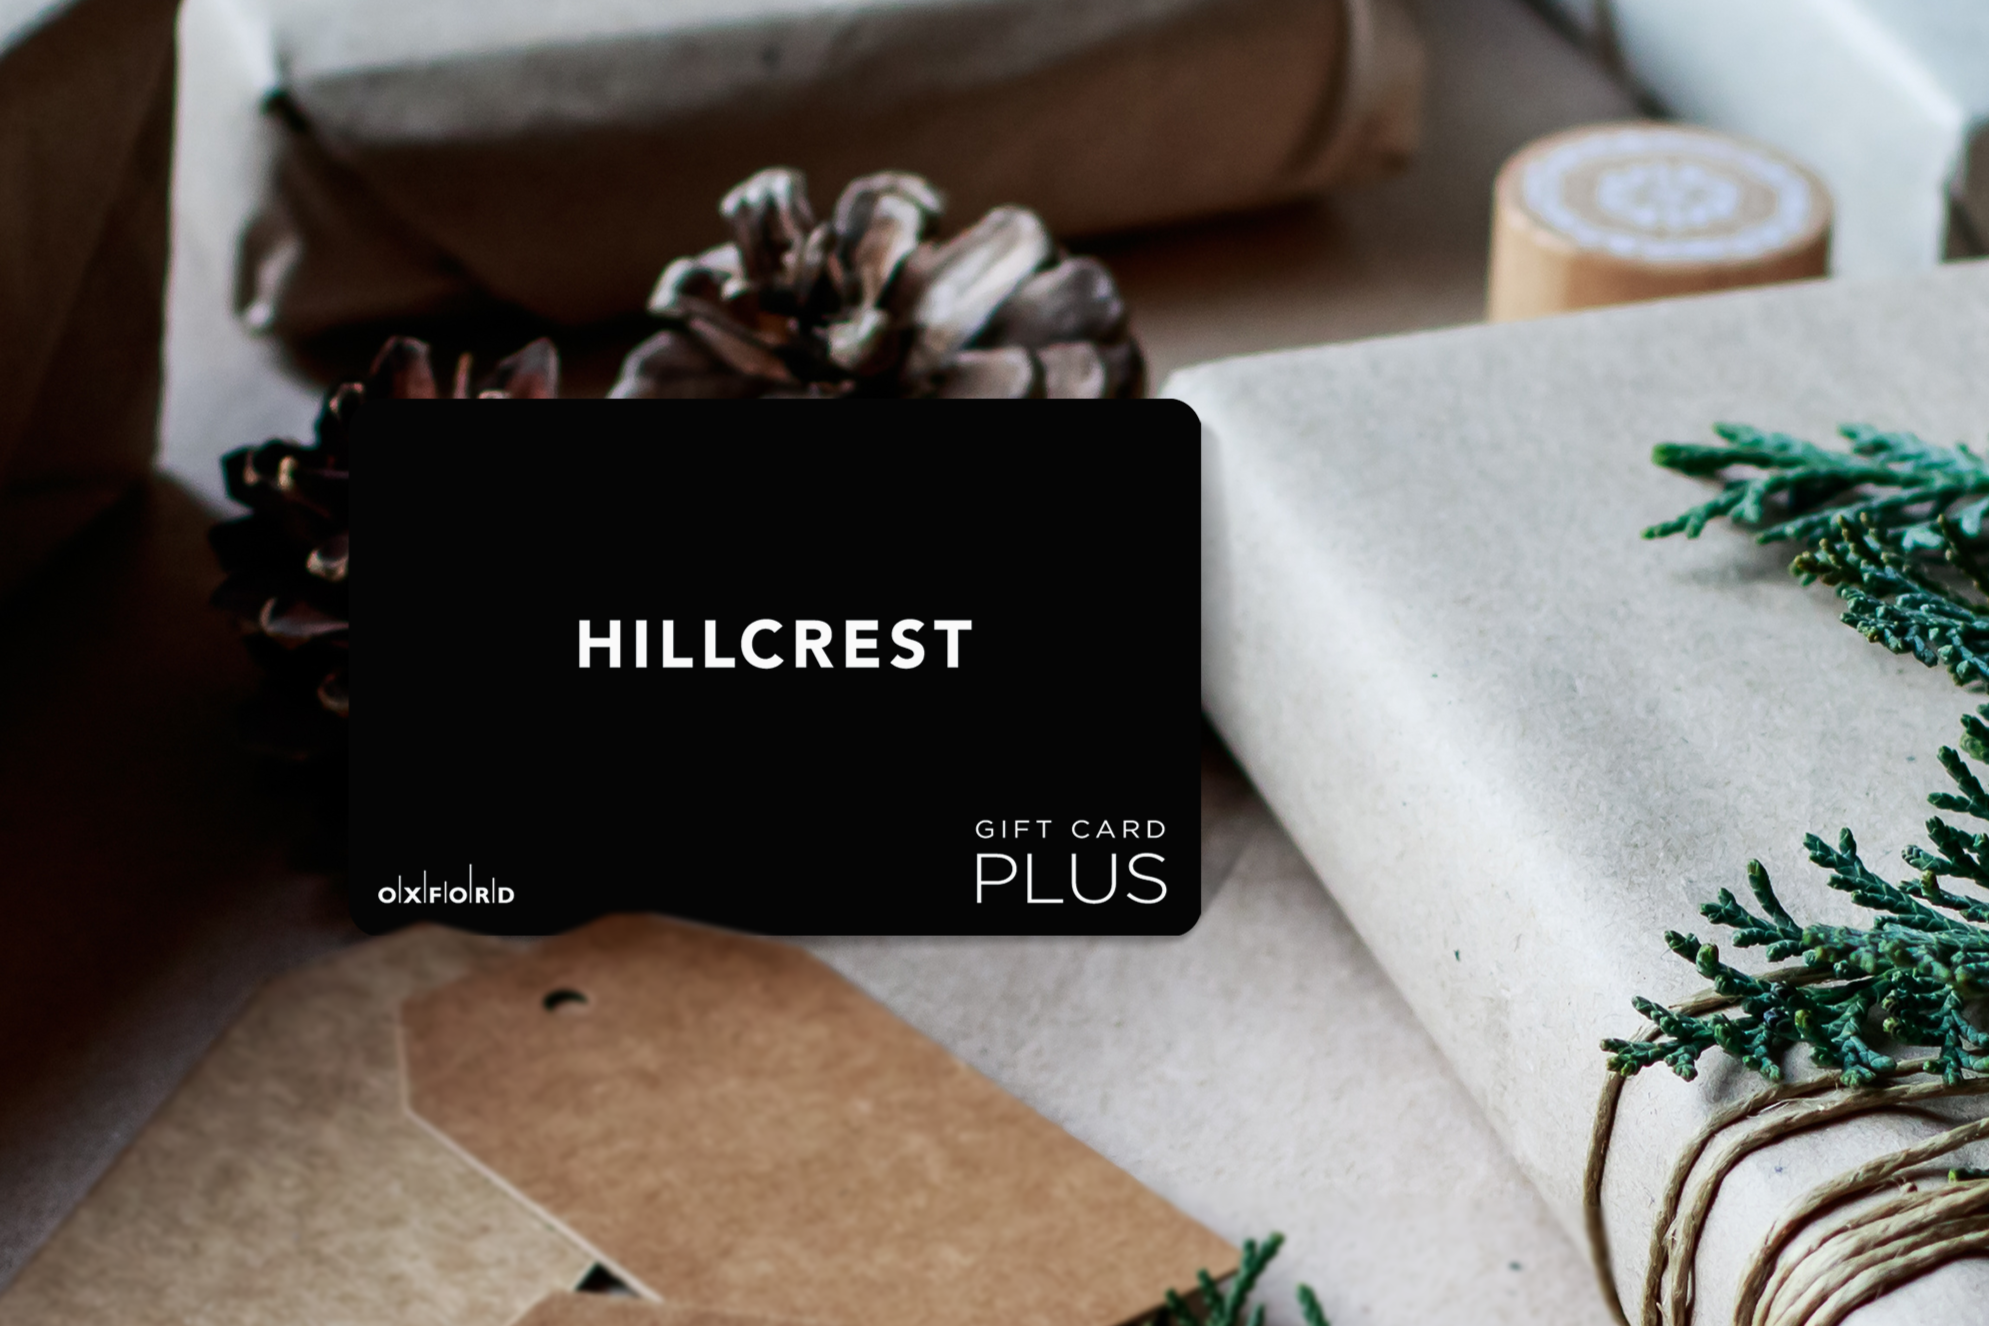 promotional image of a hillcrest gift card surrounded by gift-wrapped books in a holiday setting